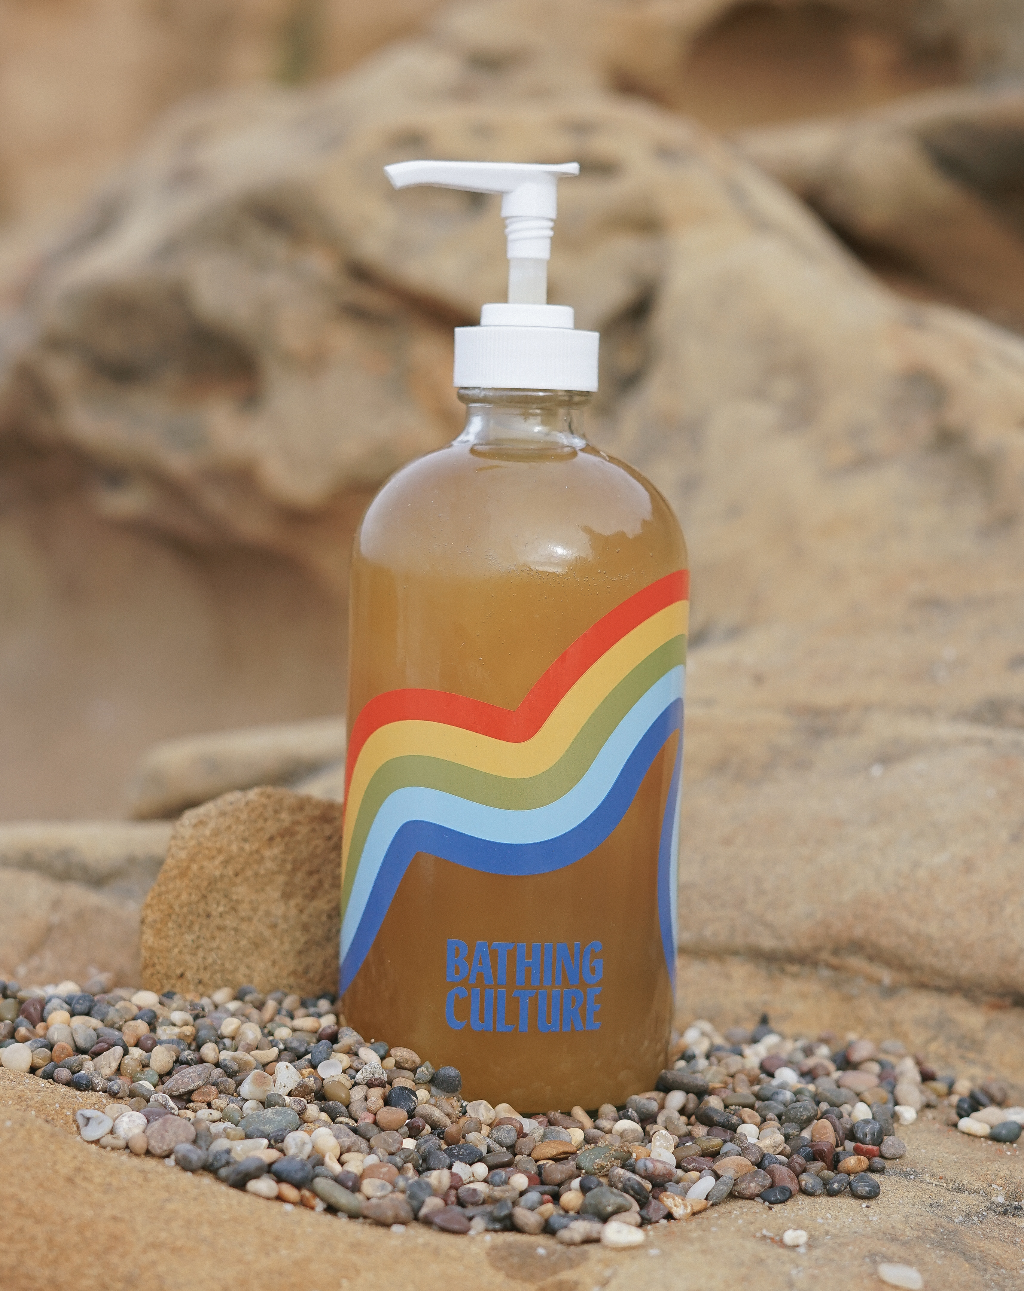 glass bottle of bathing culture body wash in the sand